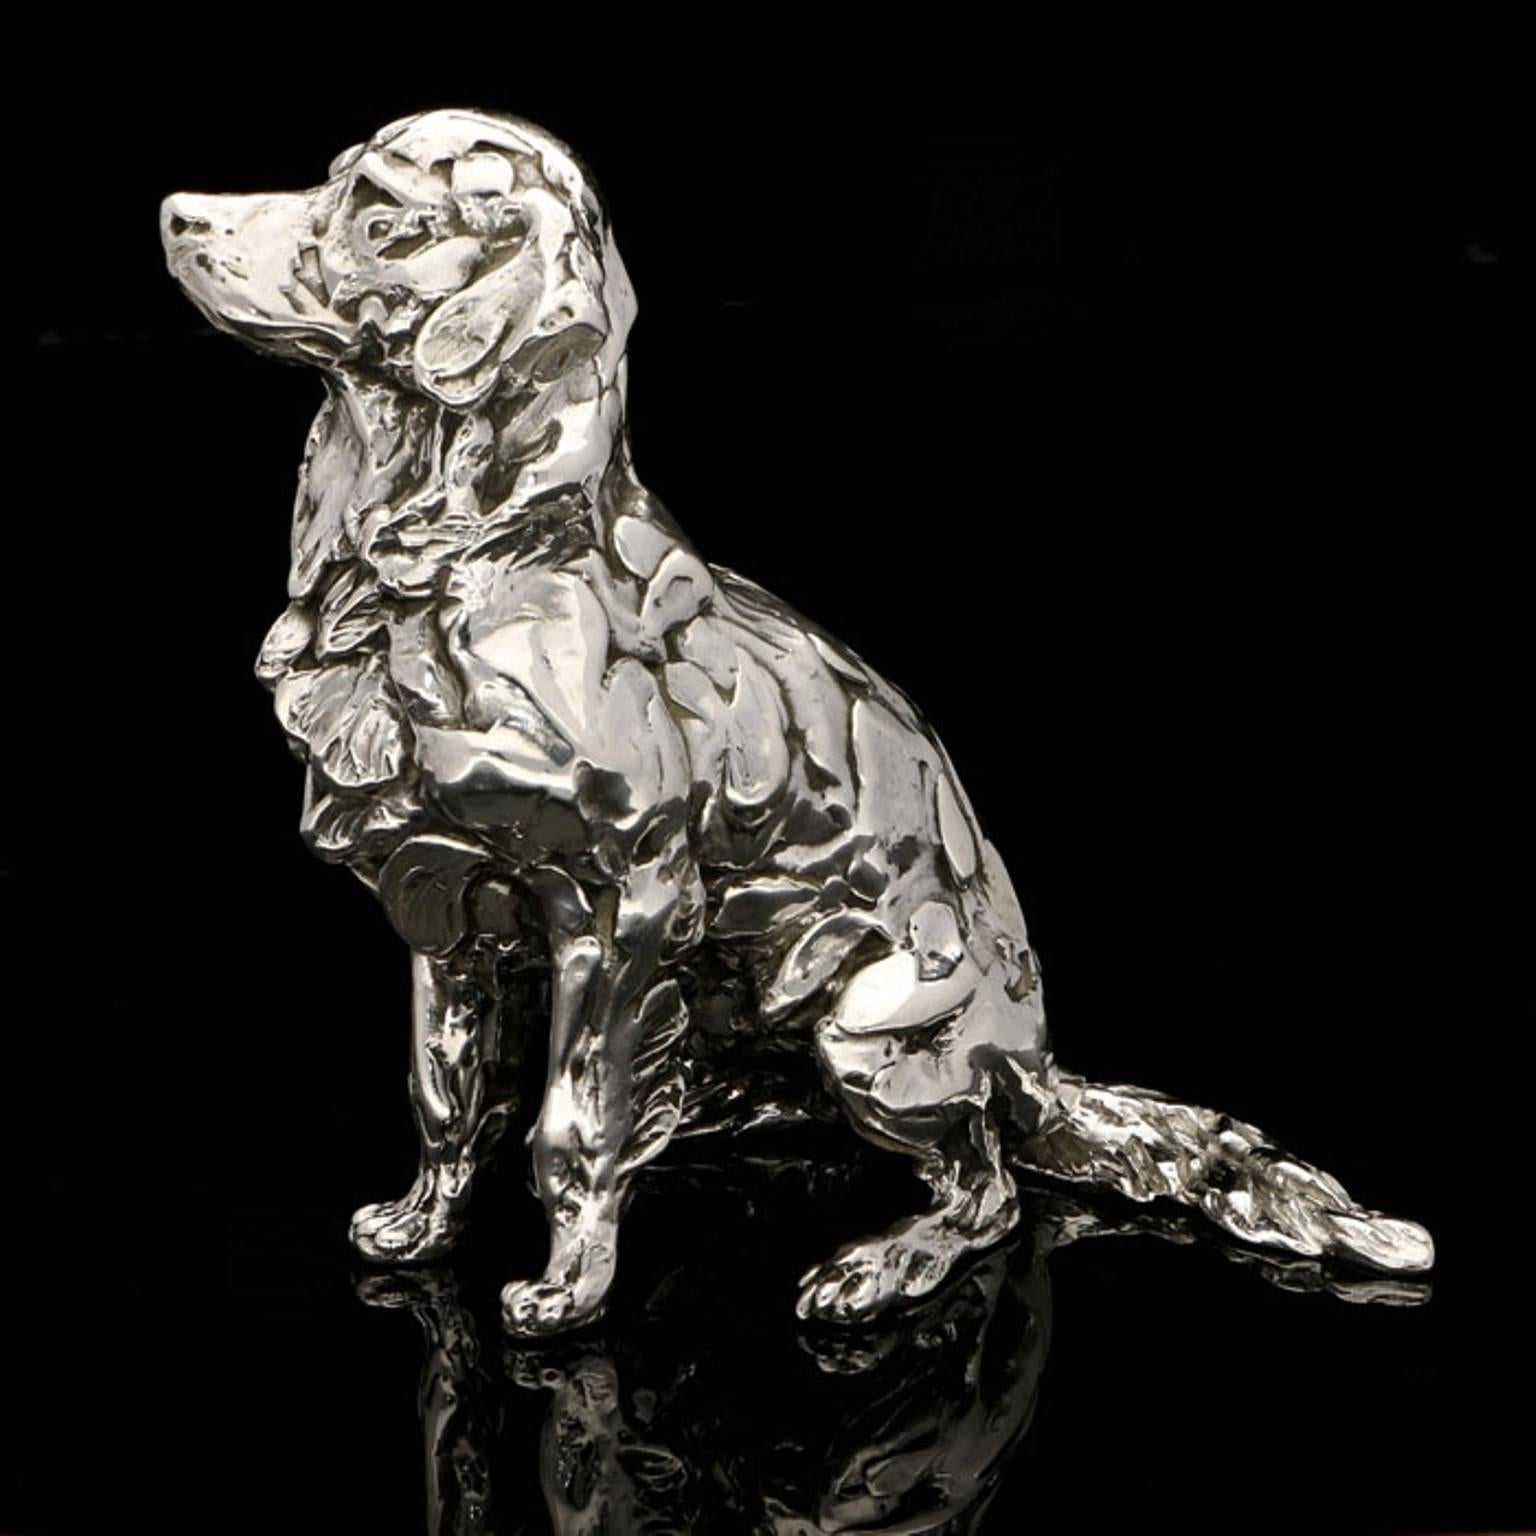 Seated Golden Retriever sterling silver sculpture - Silver Figurative Sculpture by Lucy Kinsella